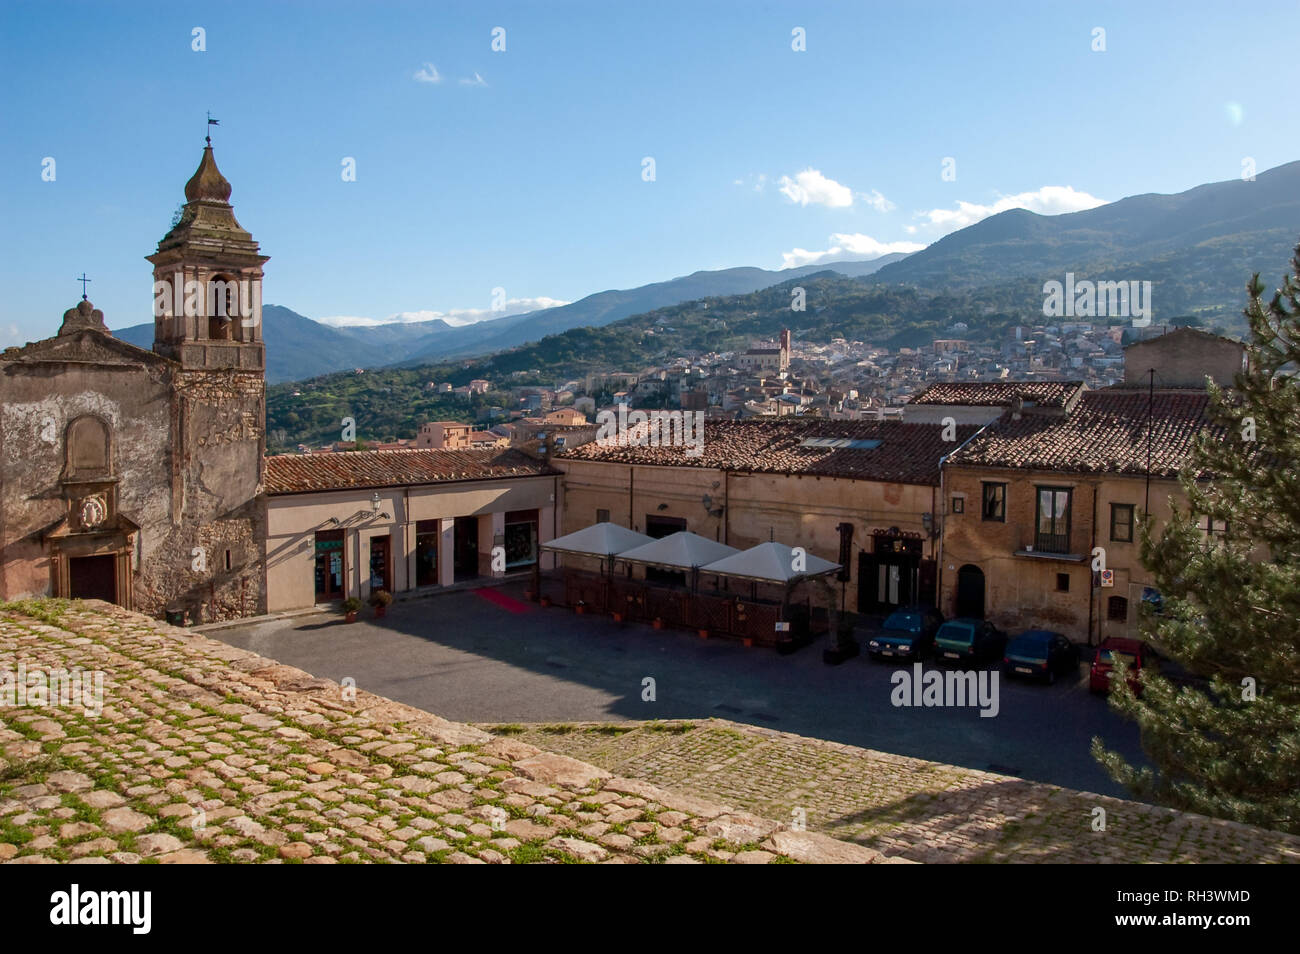 View of the small town of Castelbuono, Palermo, Sicily, from Piazza Castello. Stock Photo